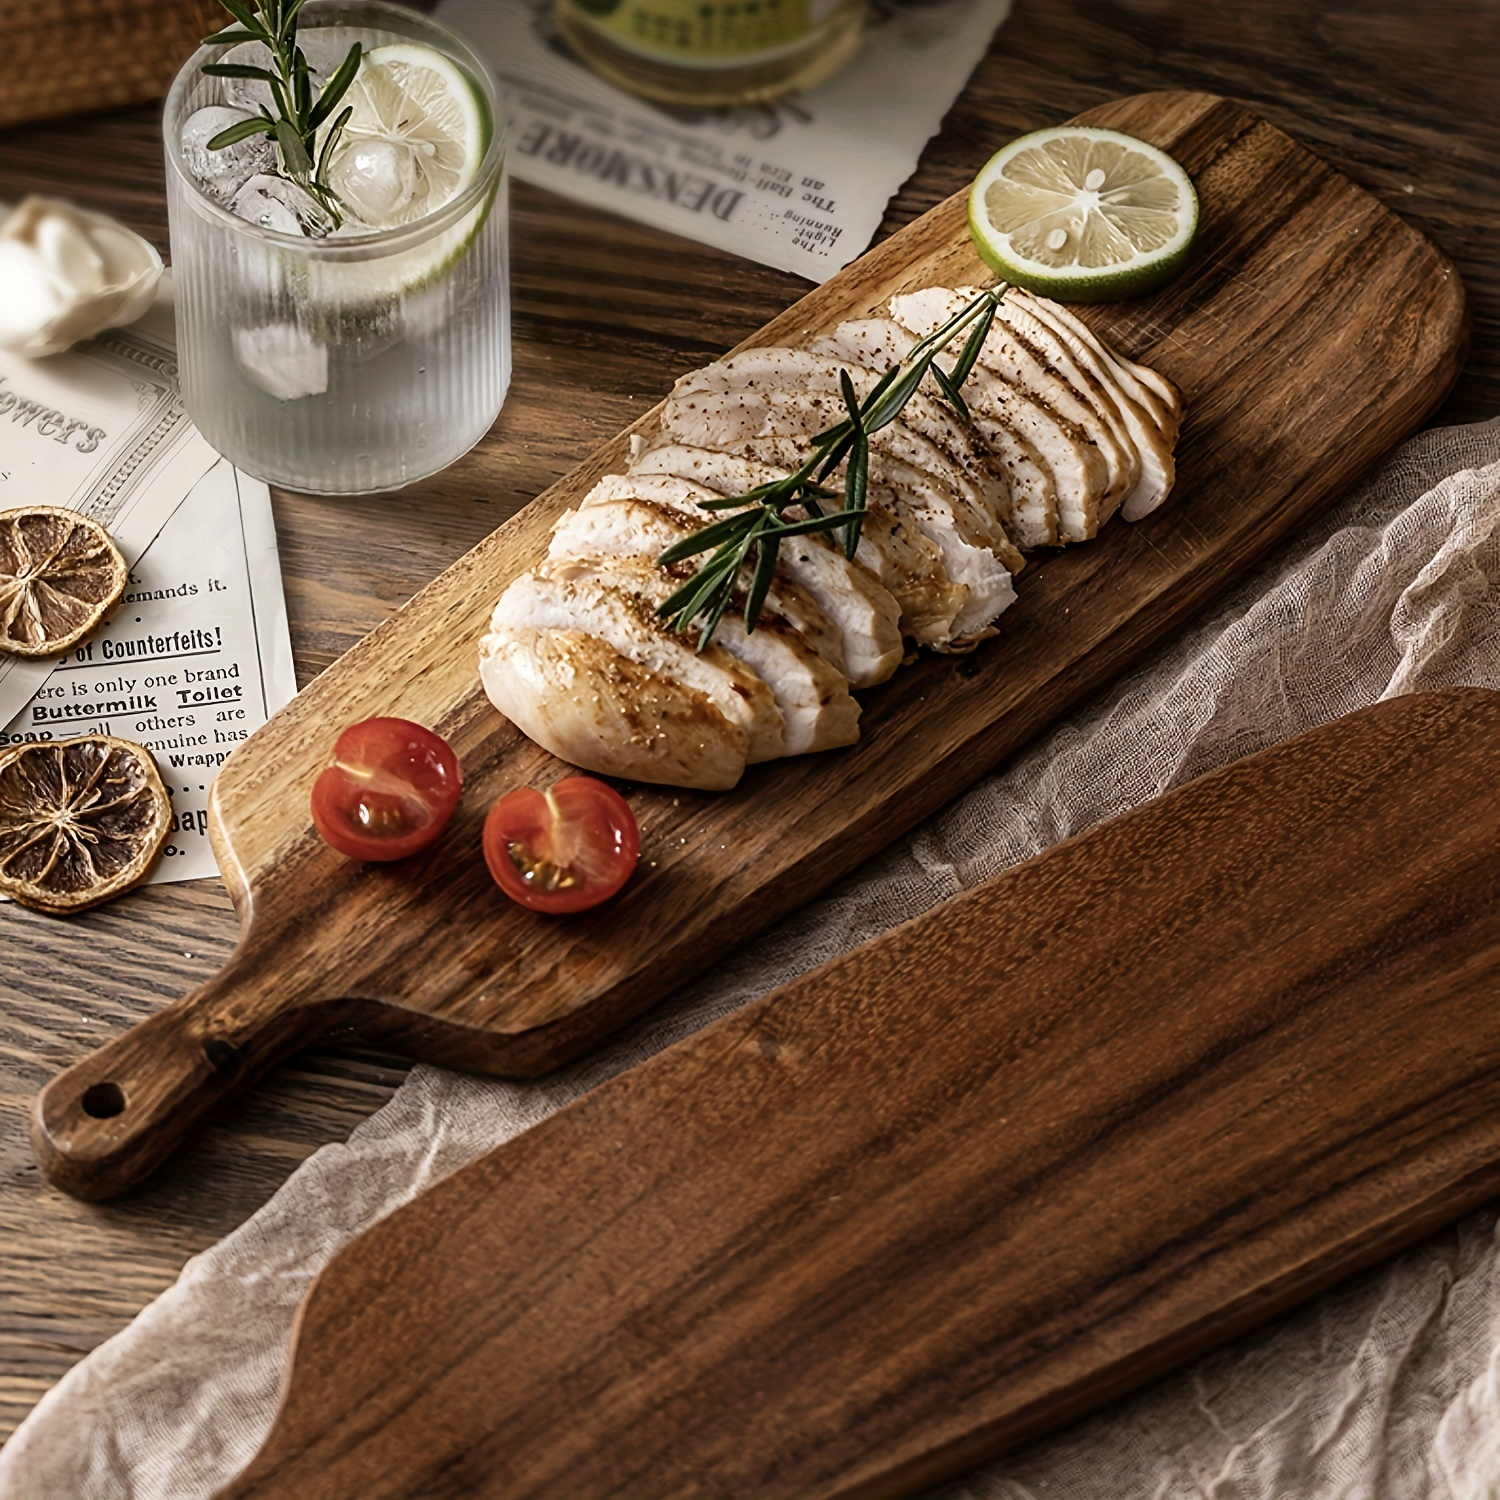  Large Acacia Wood Cutting Board with Containers for Kitchen  Simple Charcuterie Board Wooden Serving Cheese Board Meats Platter Dessert  Fruit Charcuterie Party Butcher Block Chopping Board: Home & Kitchen